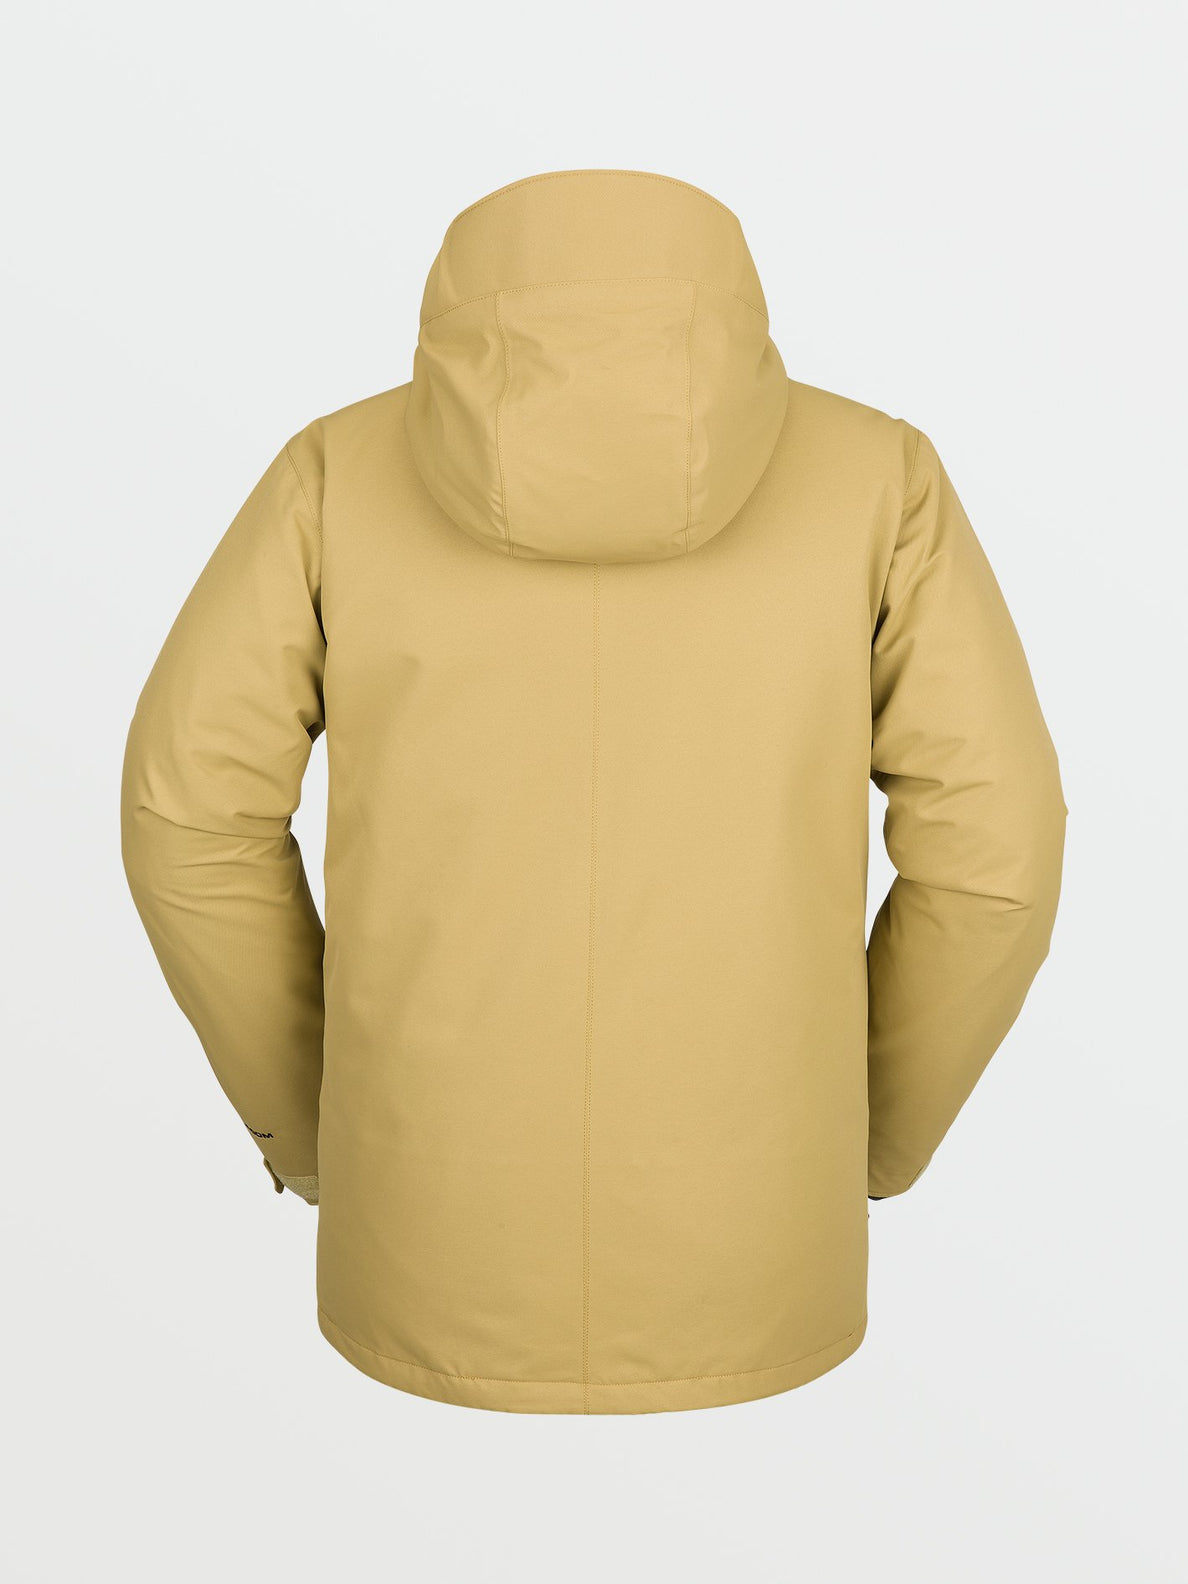 17Forty Insulated Jacket - GOLD (G0452114_GLD) [B]